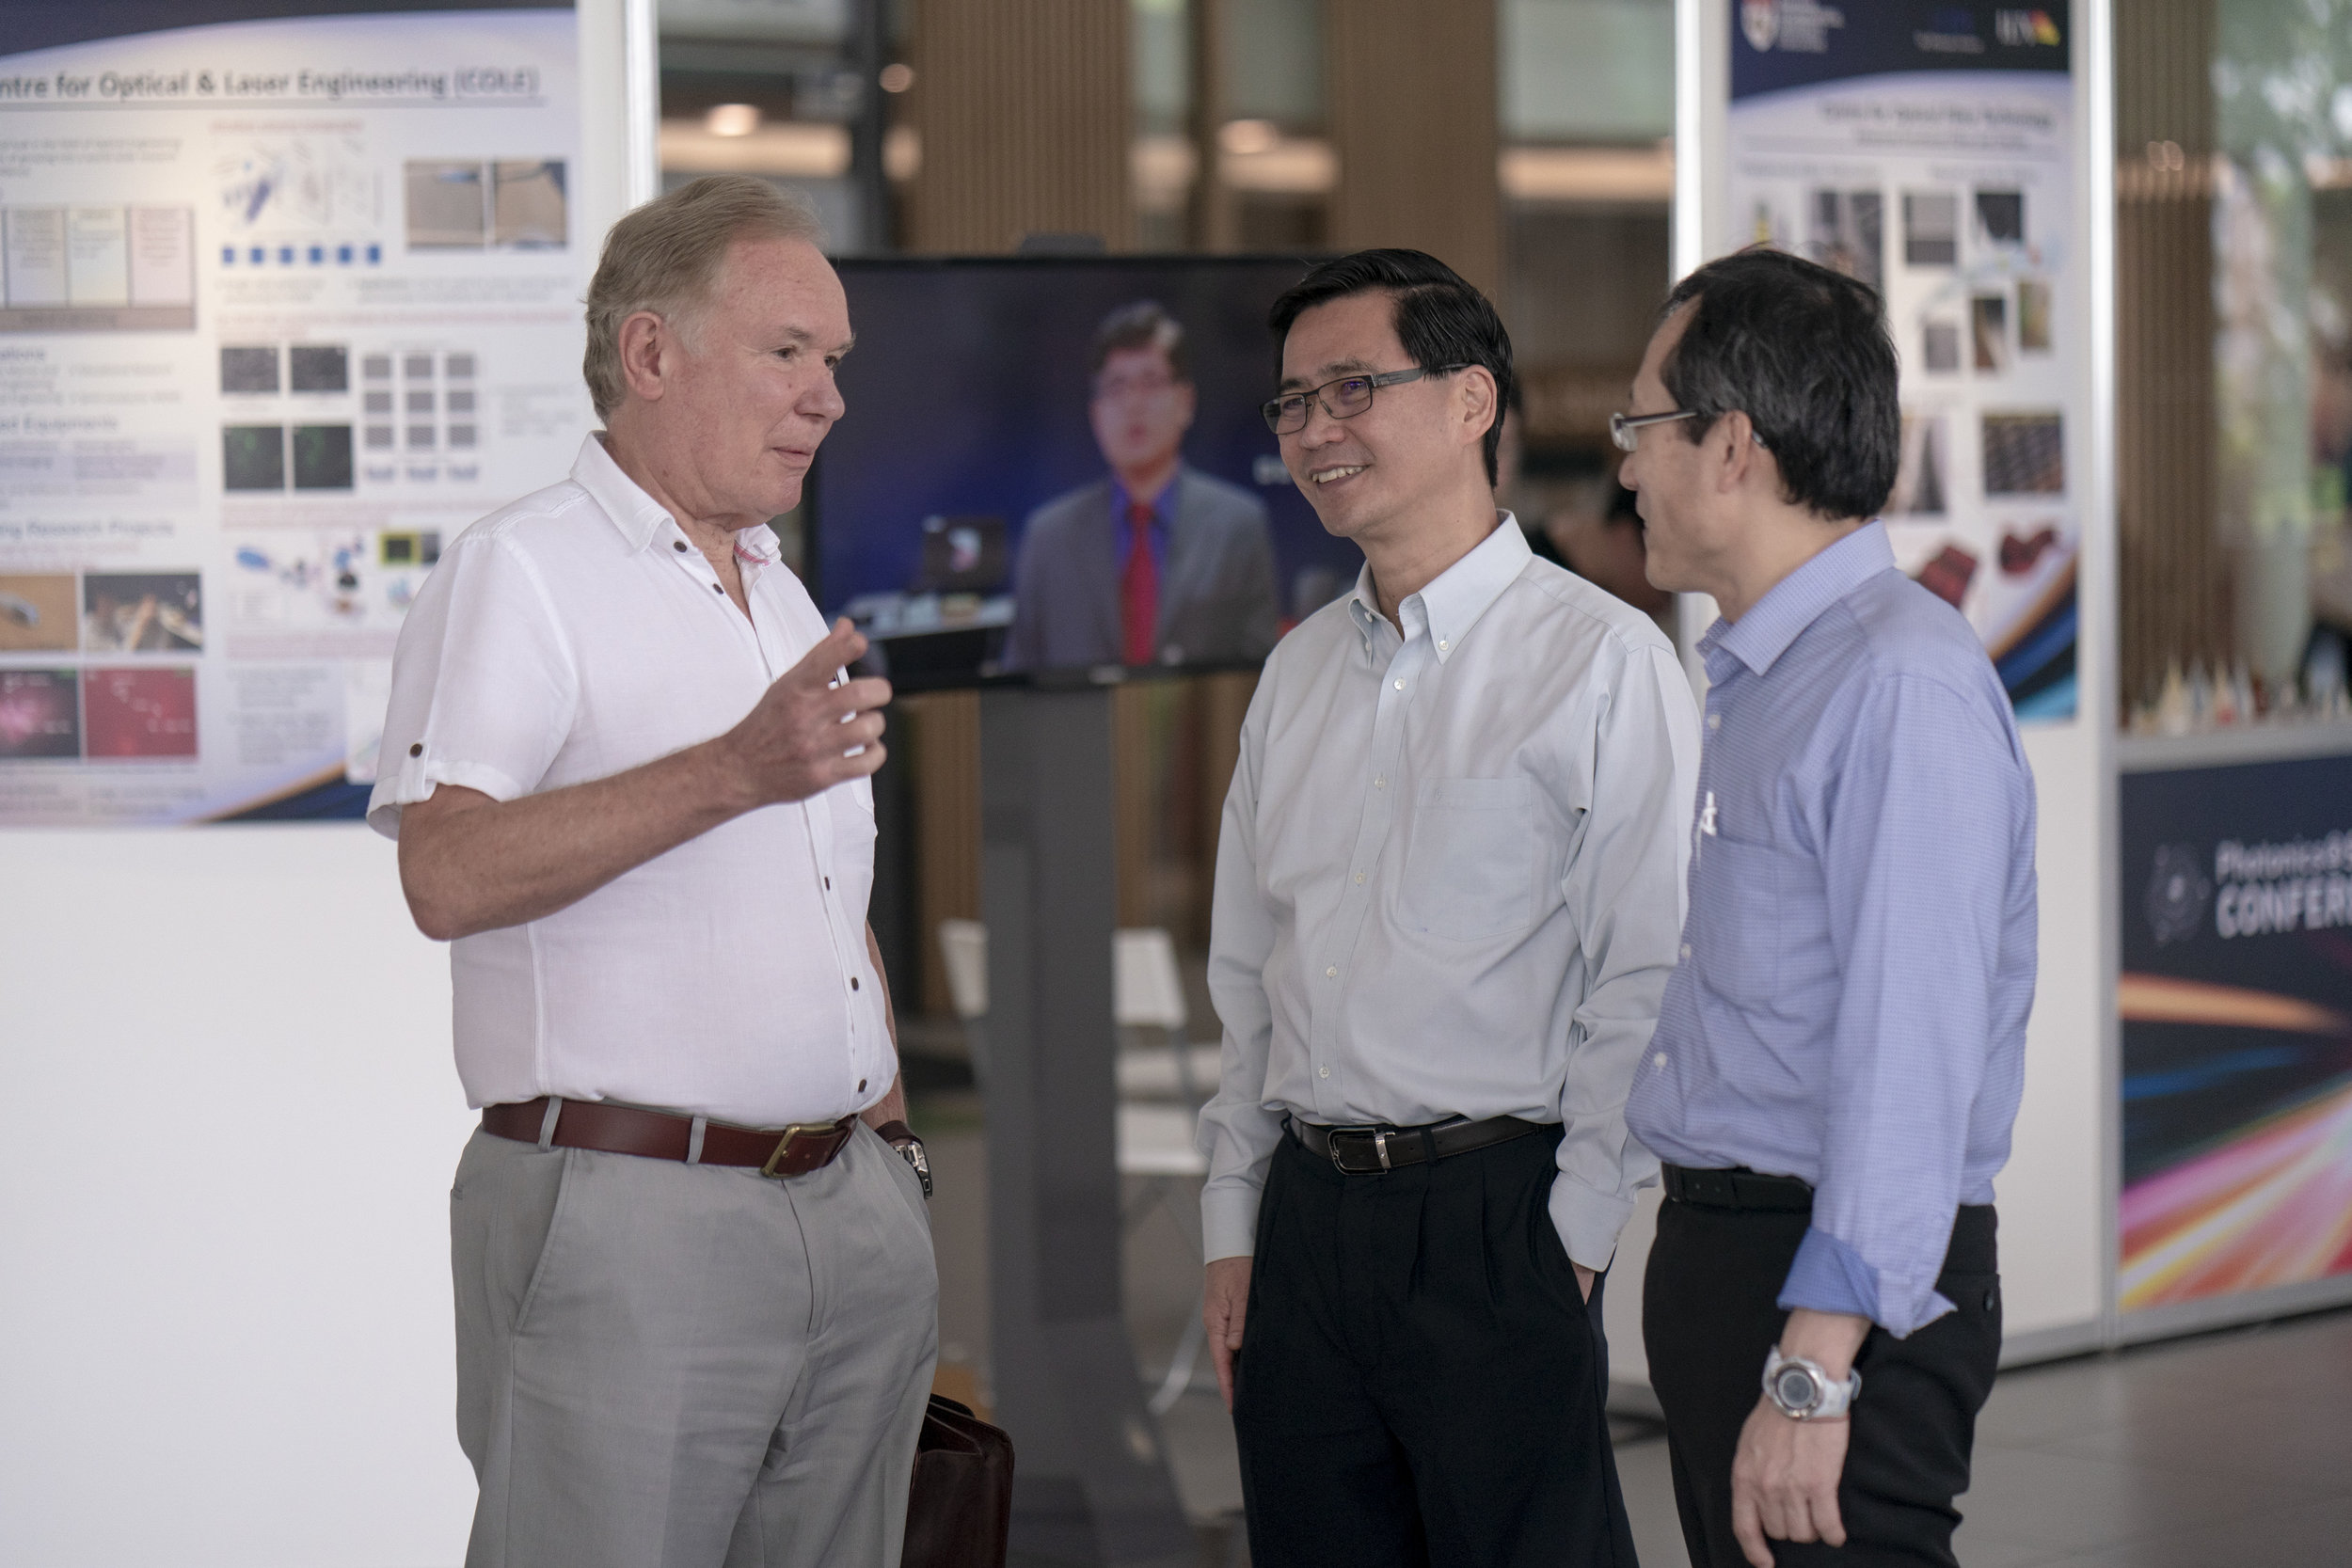 TPI Photonics SG 2018 Conference n Exhibition 0306rc.jpg